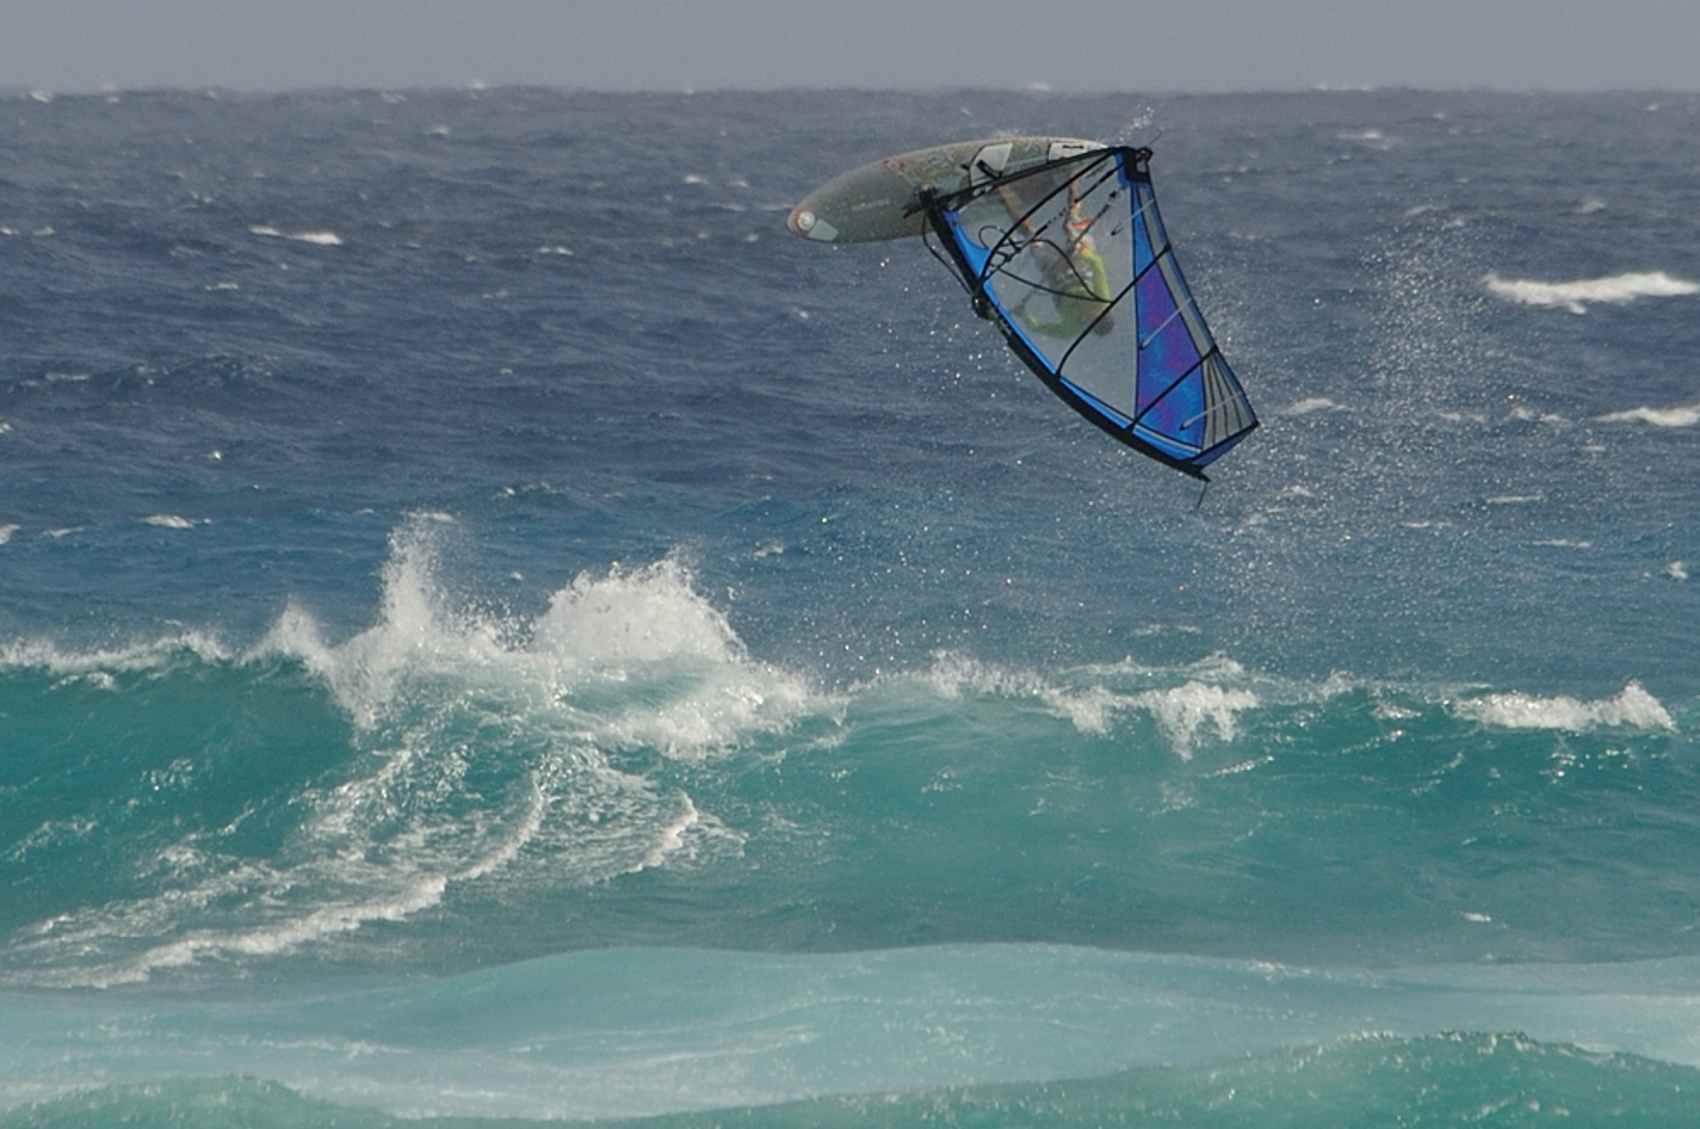 Windsurfing at Silver Sands